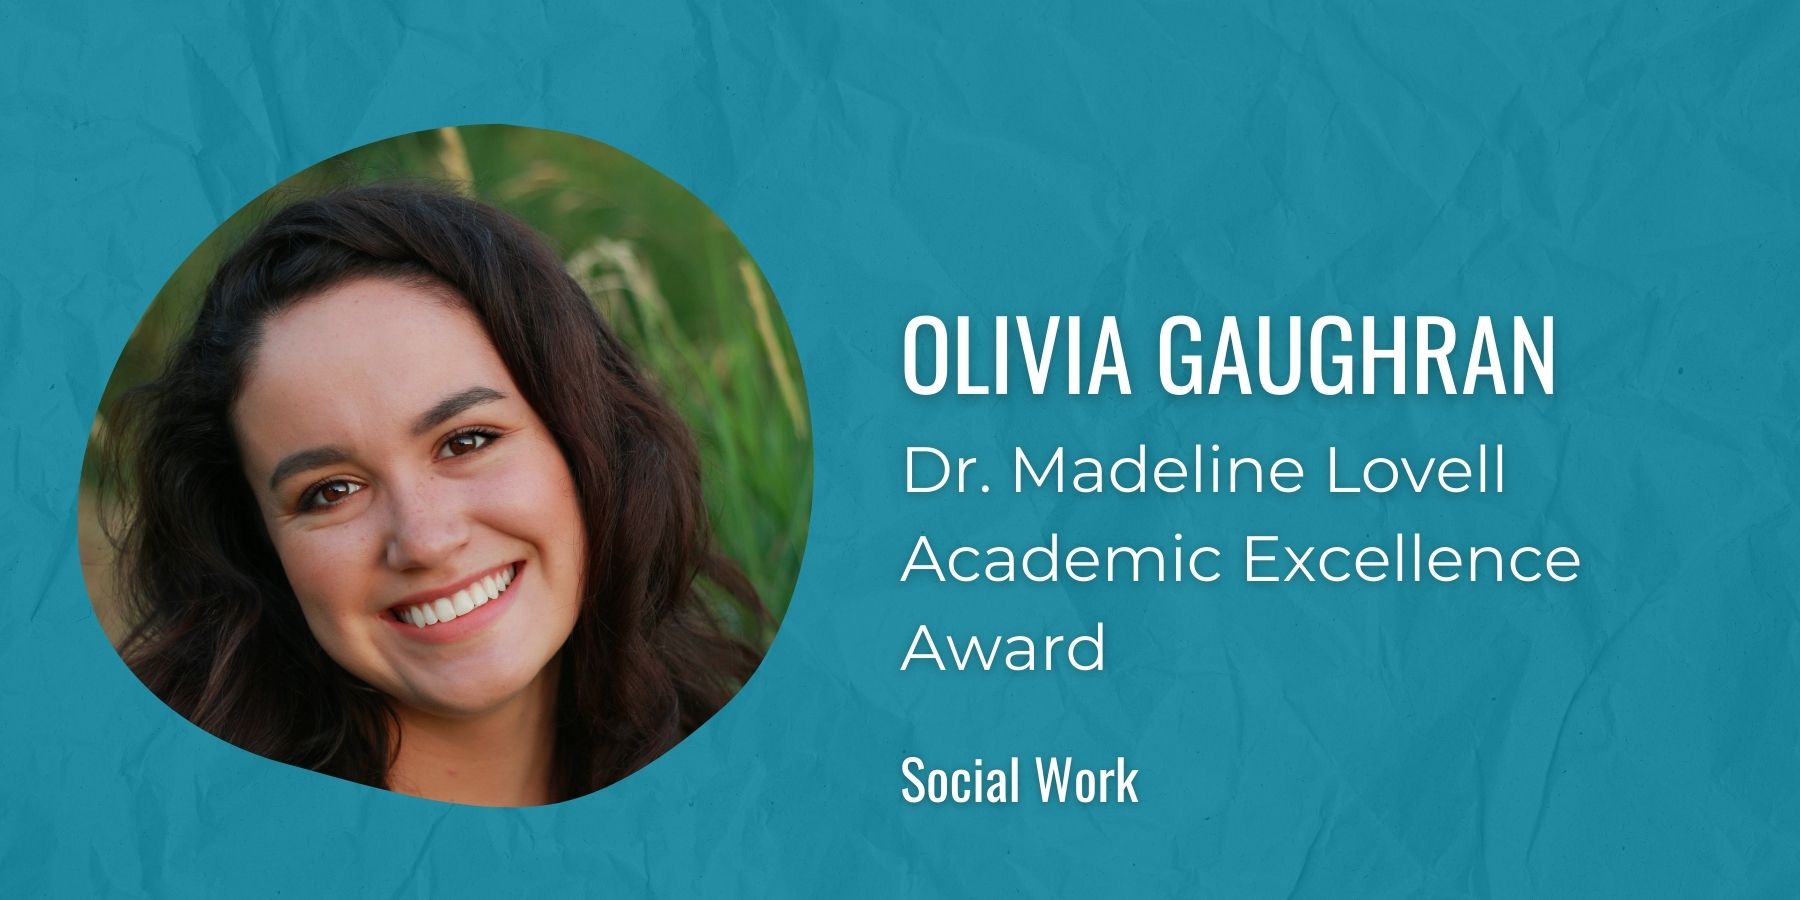 Image of Olivia Gaughran with text: Dr. Madeline Lovell Academic Excellence Award, Social Work
